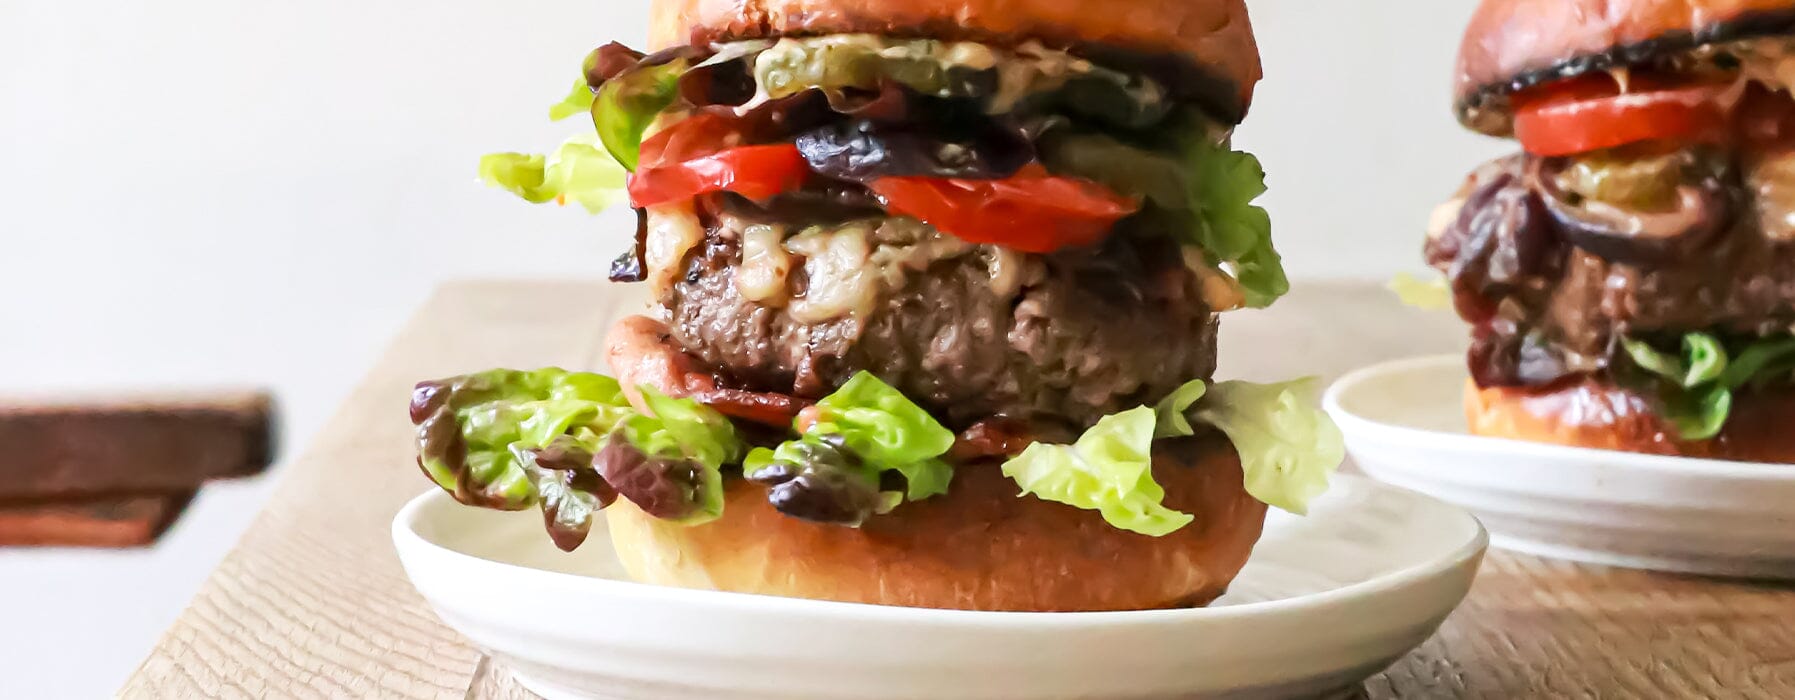 Gourmet Burgers with Sun-Dried Tomatoes